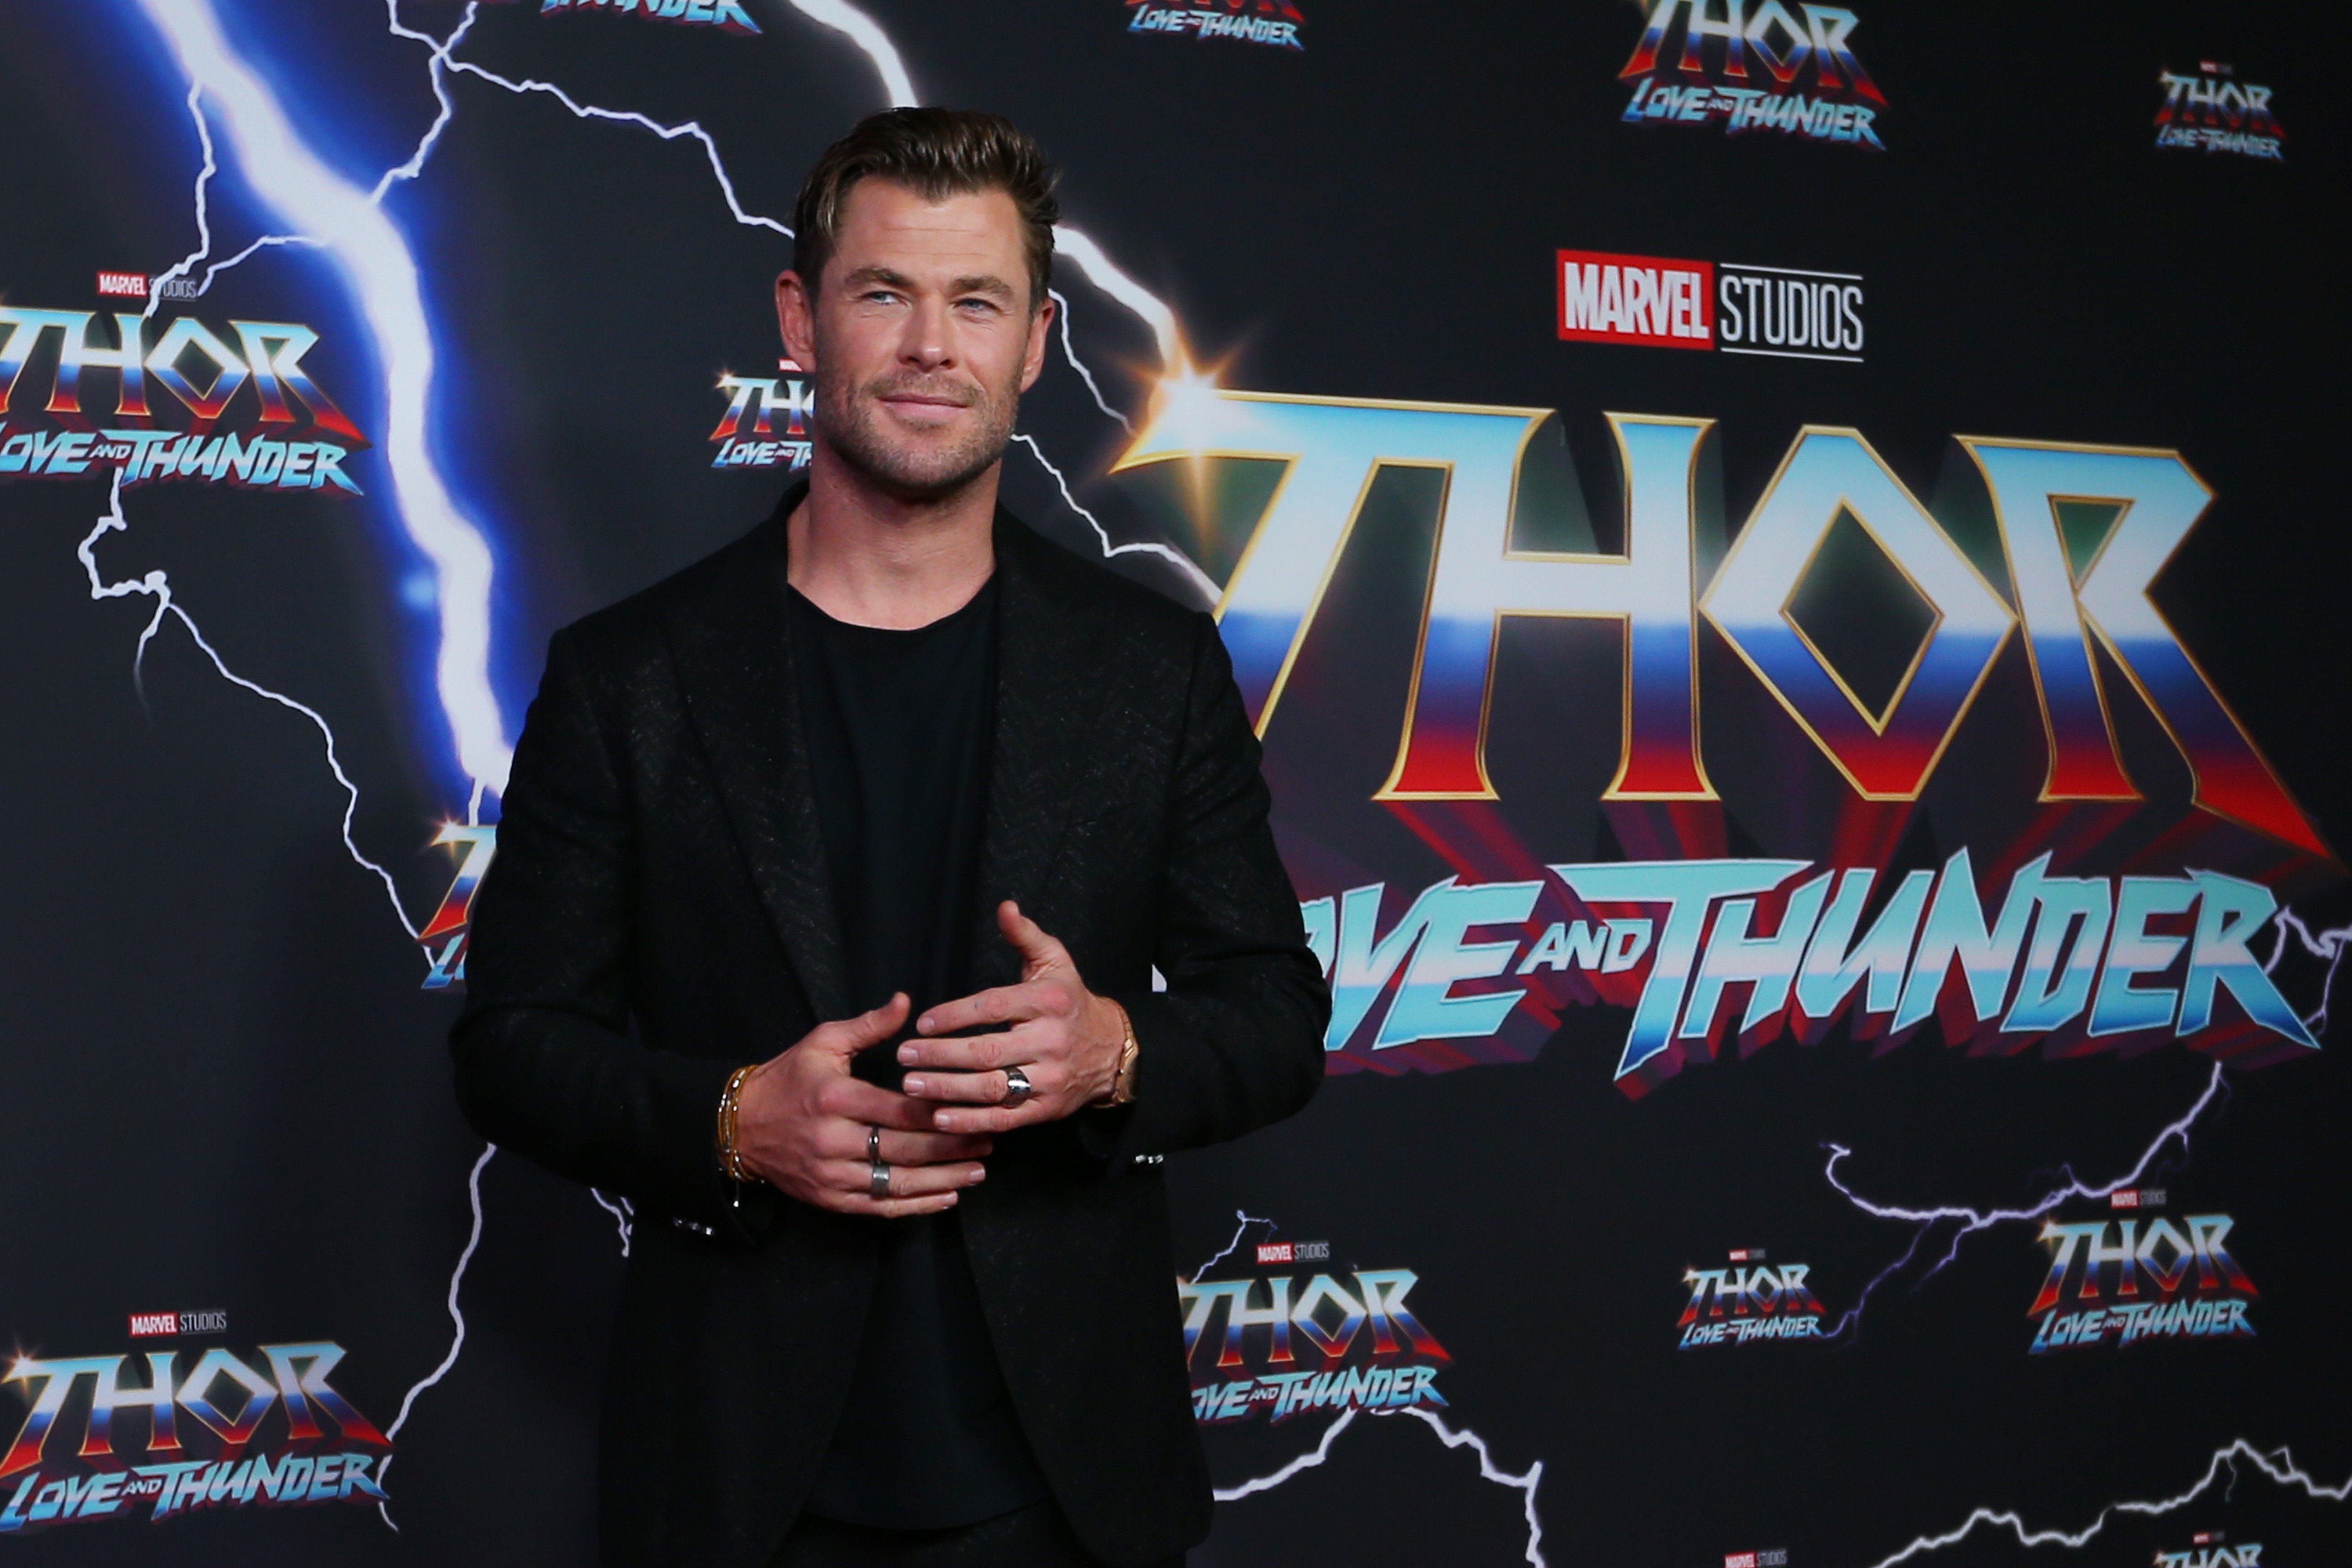 Chris Hemsworth attends the Sydney premiere of Thor: Love and Thunder which has two post-credit scenes